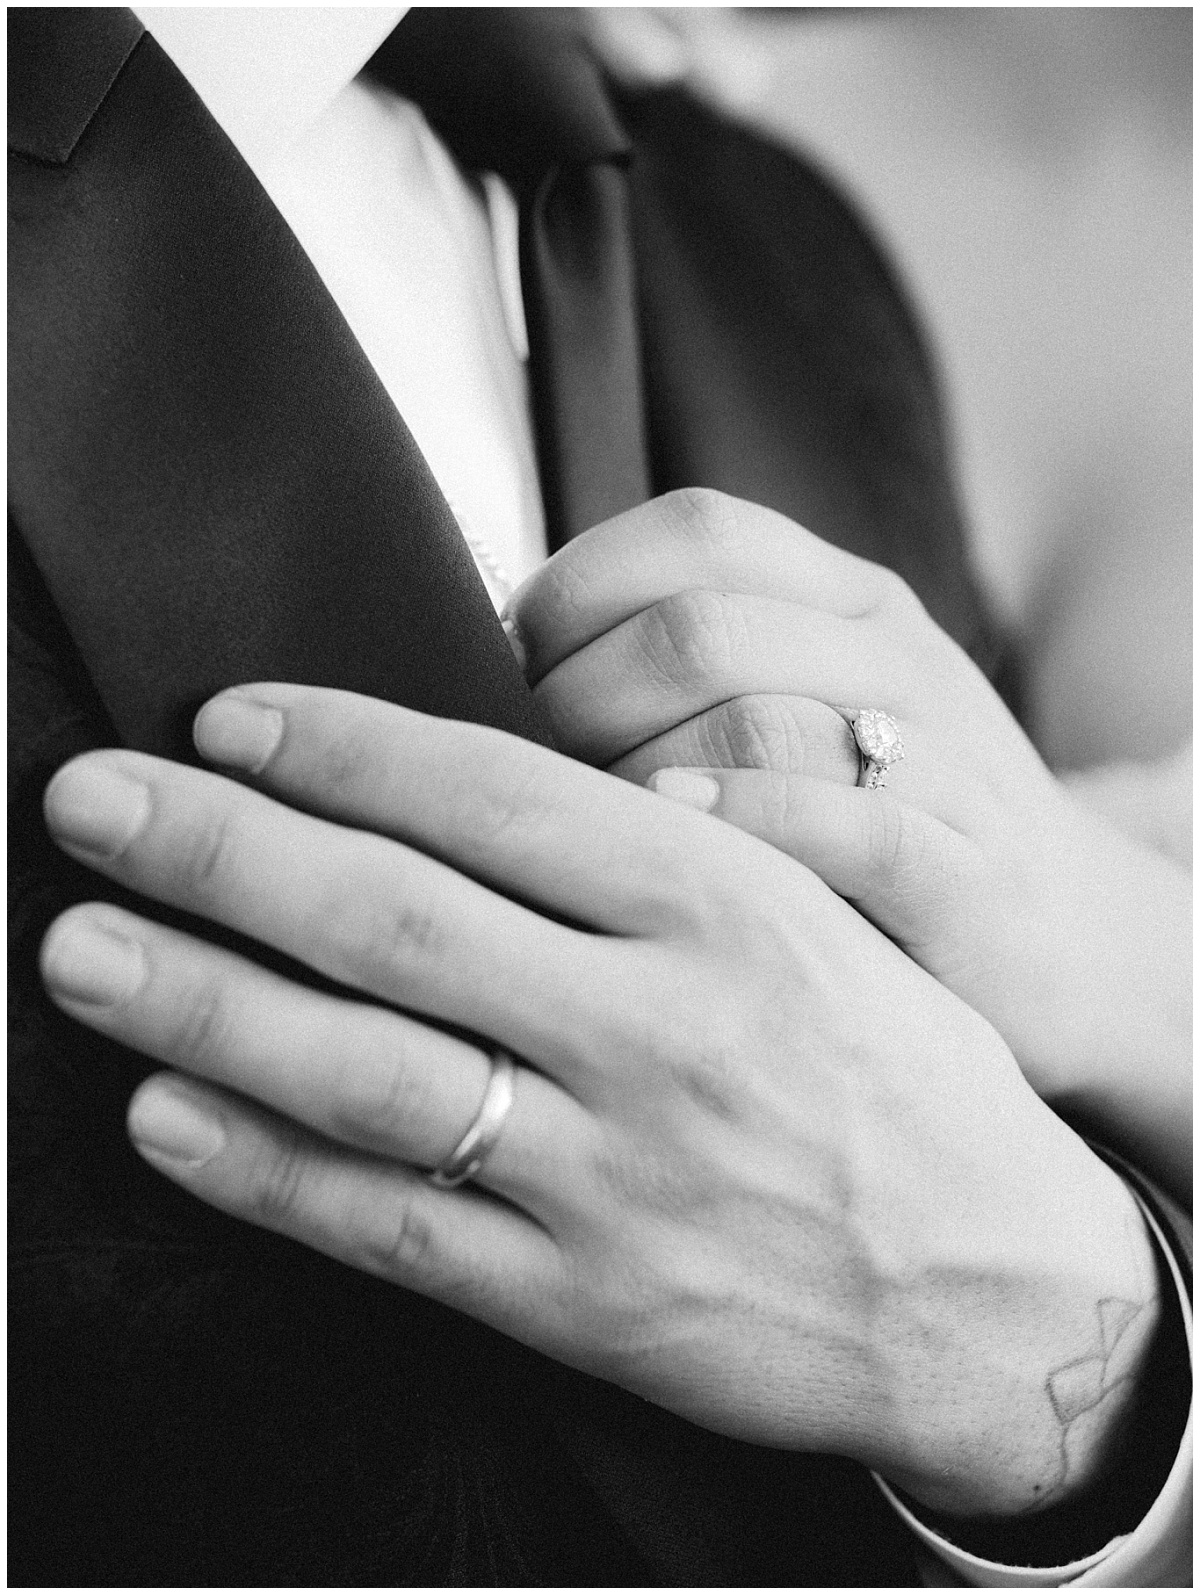 A classic black and white detail shot of the couple hands with their rings